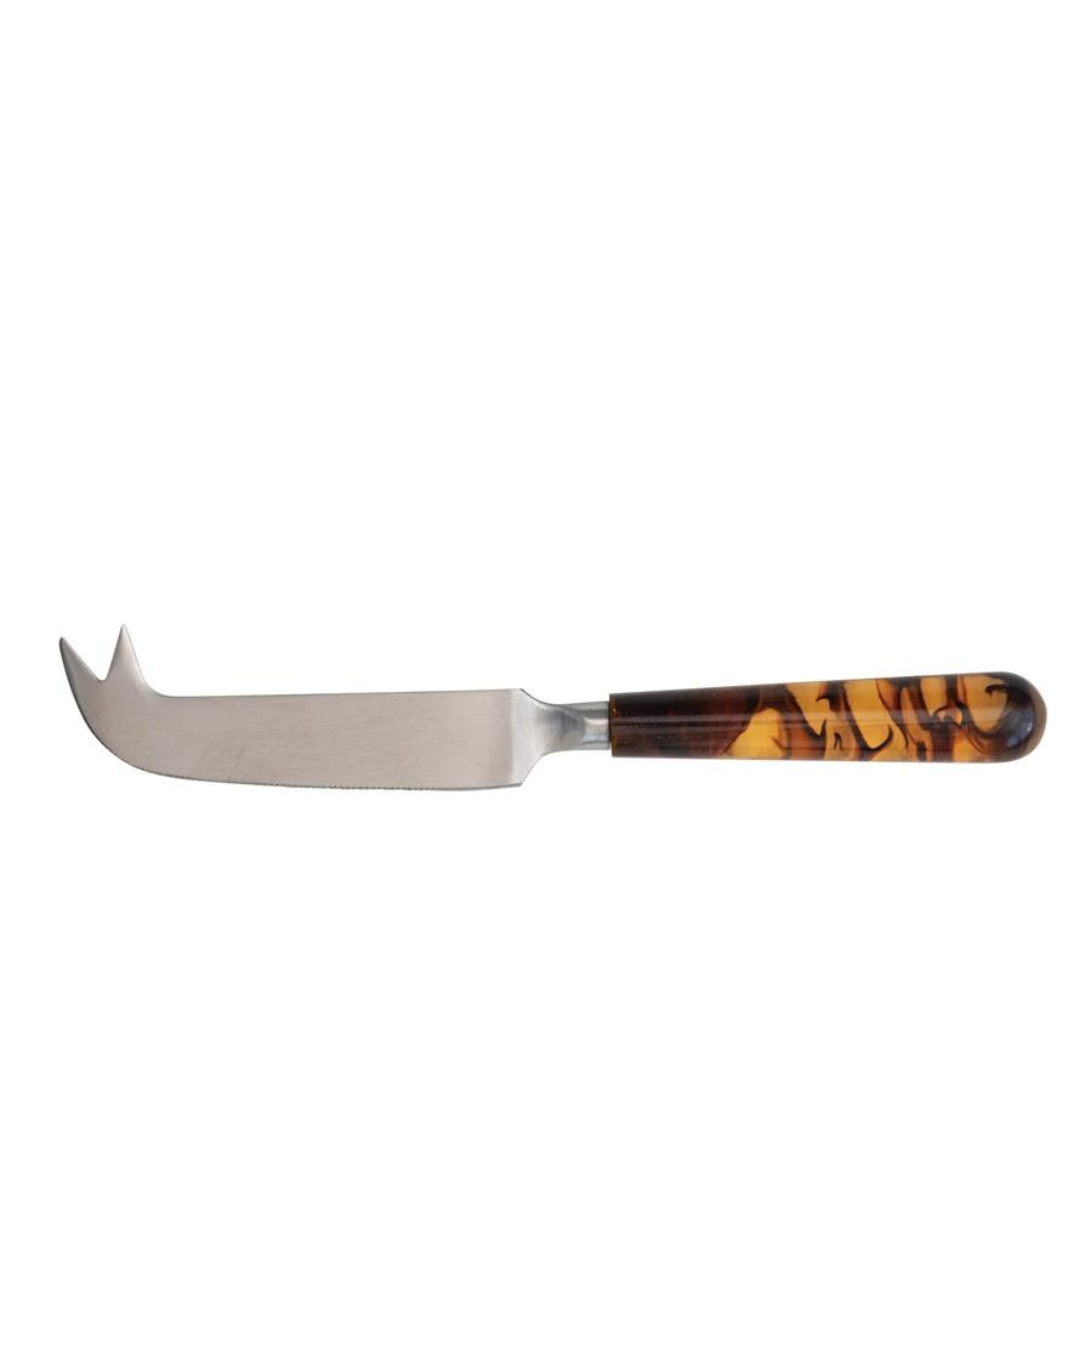 A Creative Co-op Stainless Steel Cheese Knife w/ Resin Handle, Tortoise Shell Finish with a curved tip for slicing and piercing cheese. The glossy, resin handle features a tortoise shell hue in shades of brown and amber. This elegant design is perfect for serving cheese at gatherings.